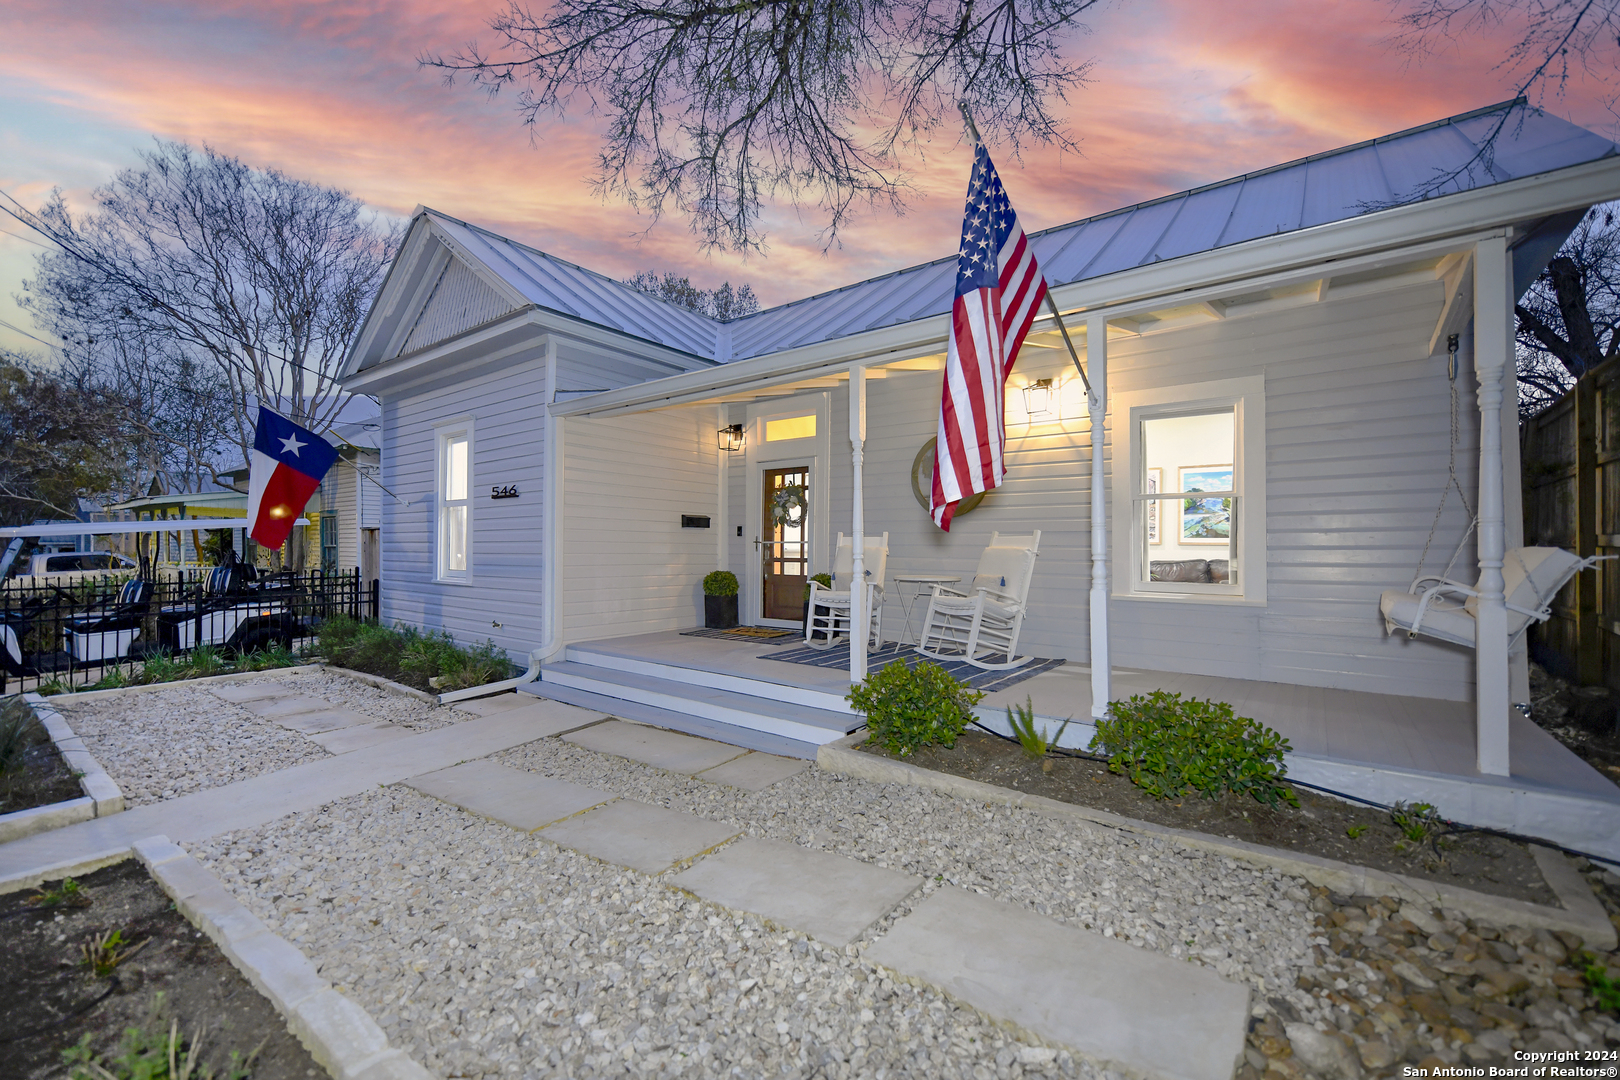 Photo of 546 Academy Ave in New Braunfels, TX